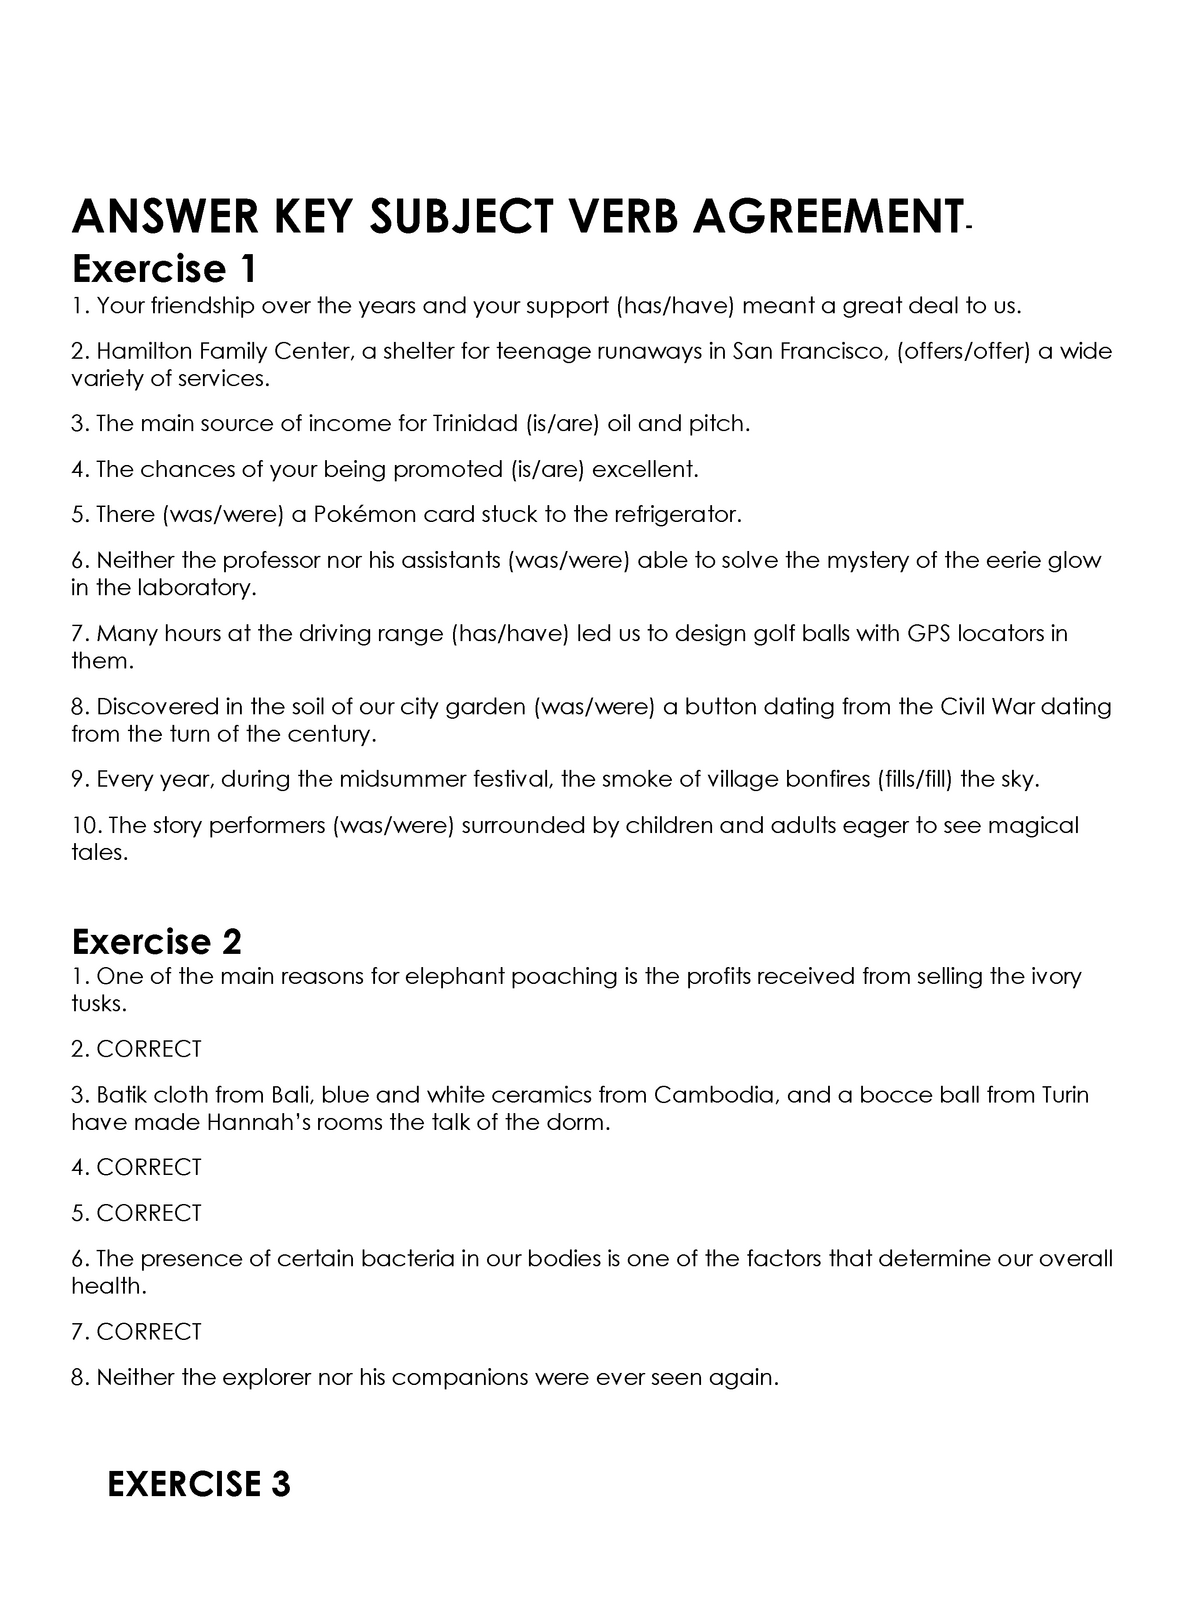 unit-1-answer-key-subject-verb-agreement-answer-key-subject-verb-agreement-exercise-1-your